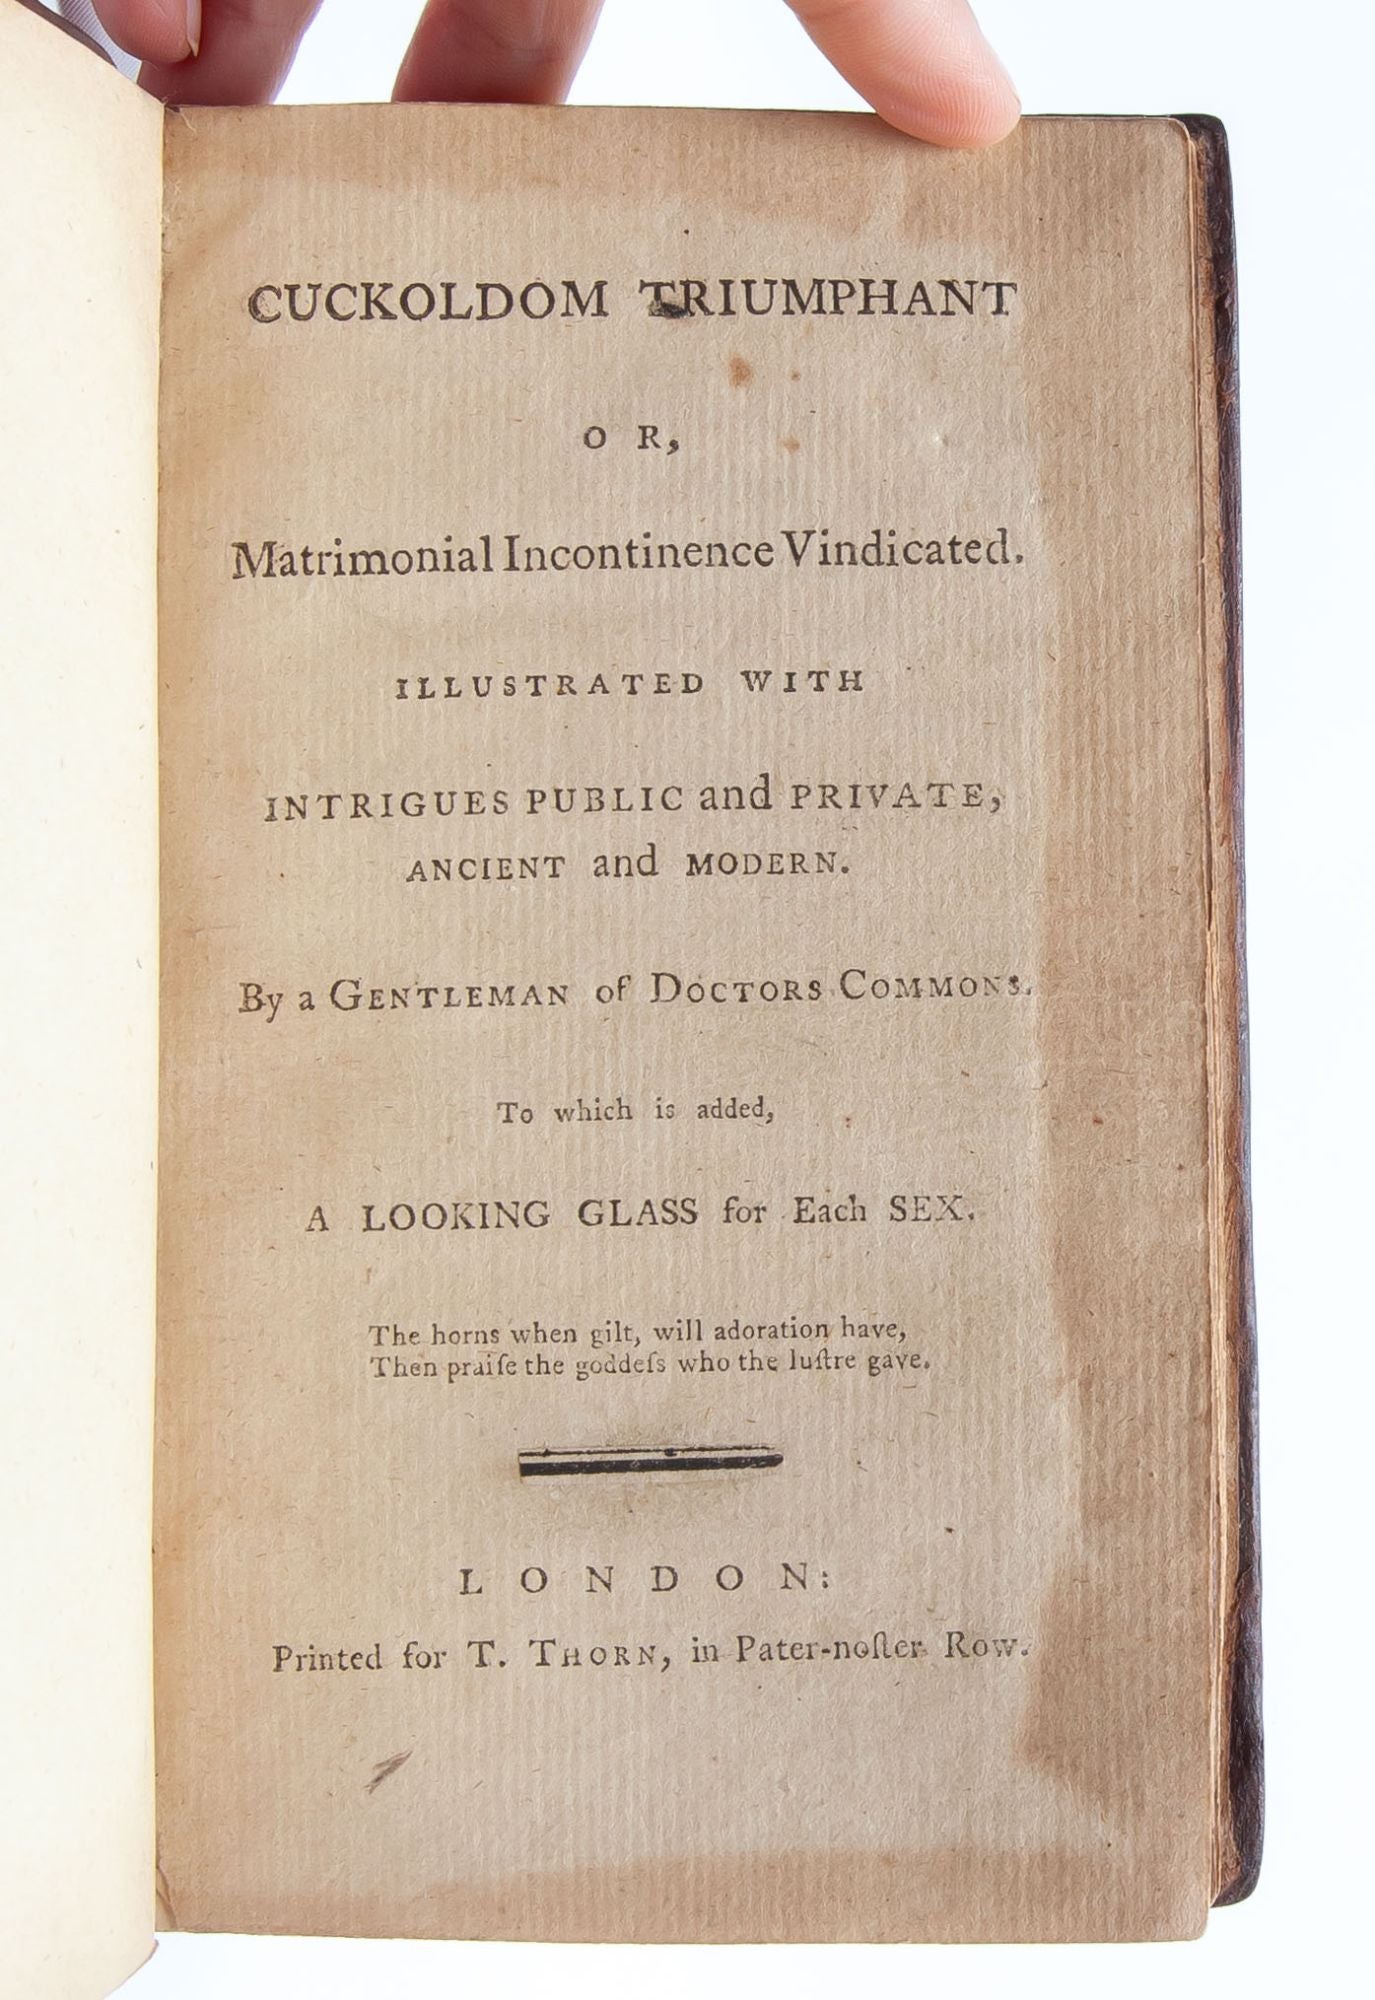 Cuckoldom Triumphant; or, Matrimonial Incontinence Vindicated...To which is added A Looking Glass for Each Sex Erotic Literature, A Gentleman of Doctors Commons, Cornuto First edition hq image